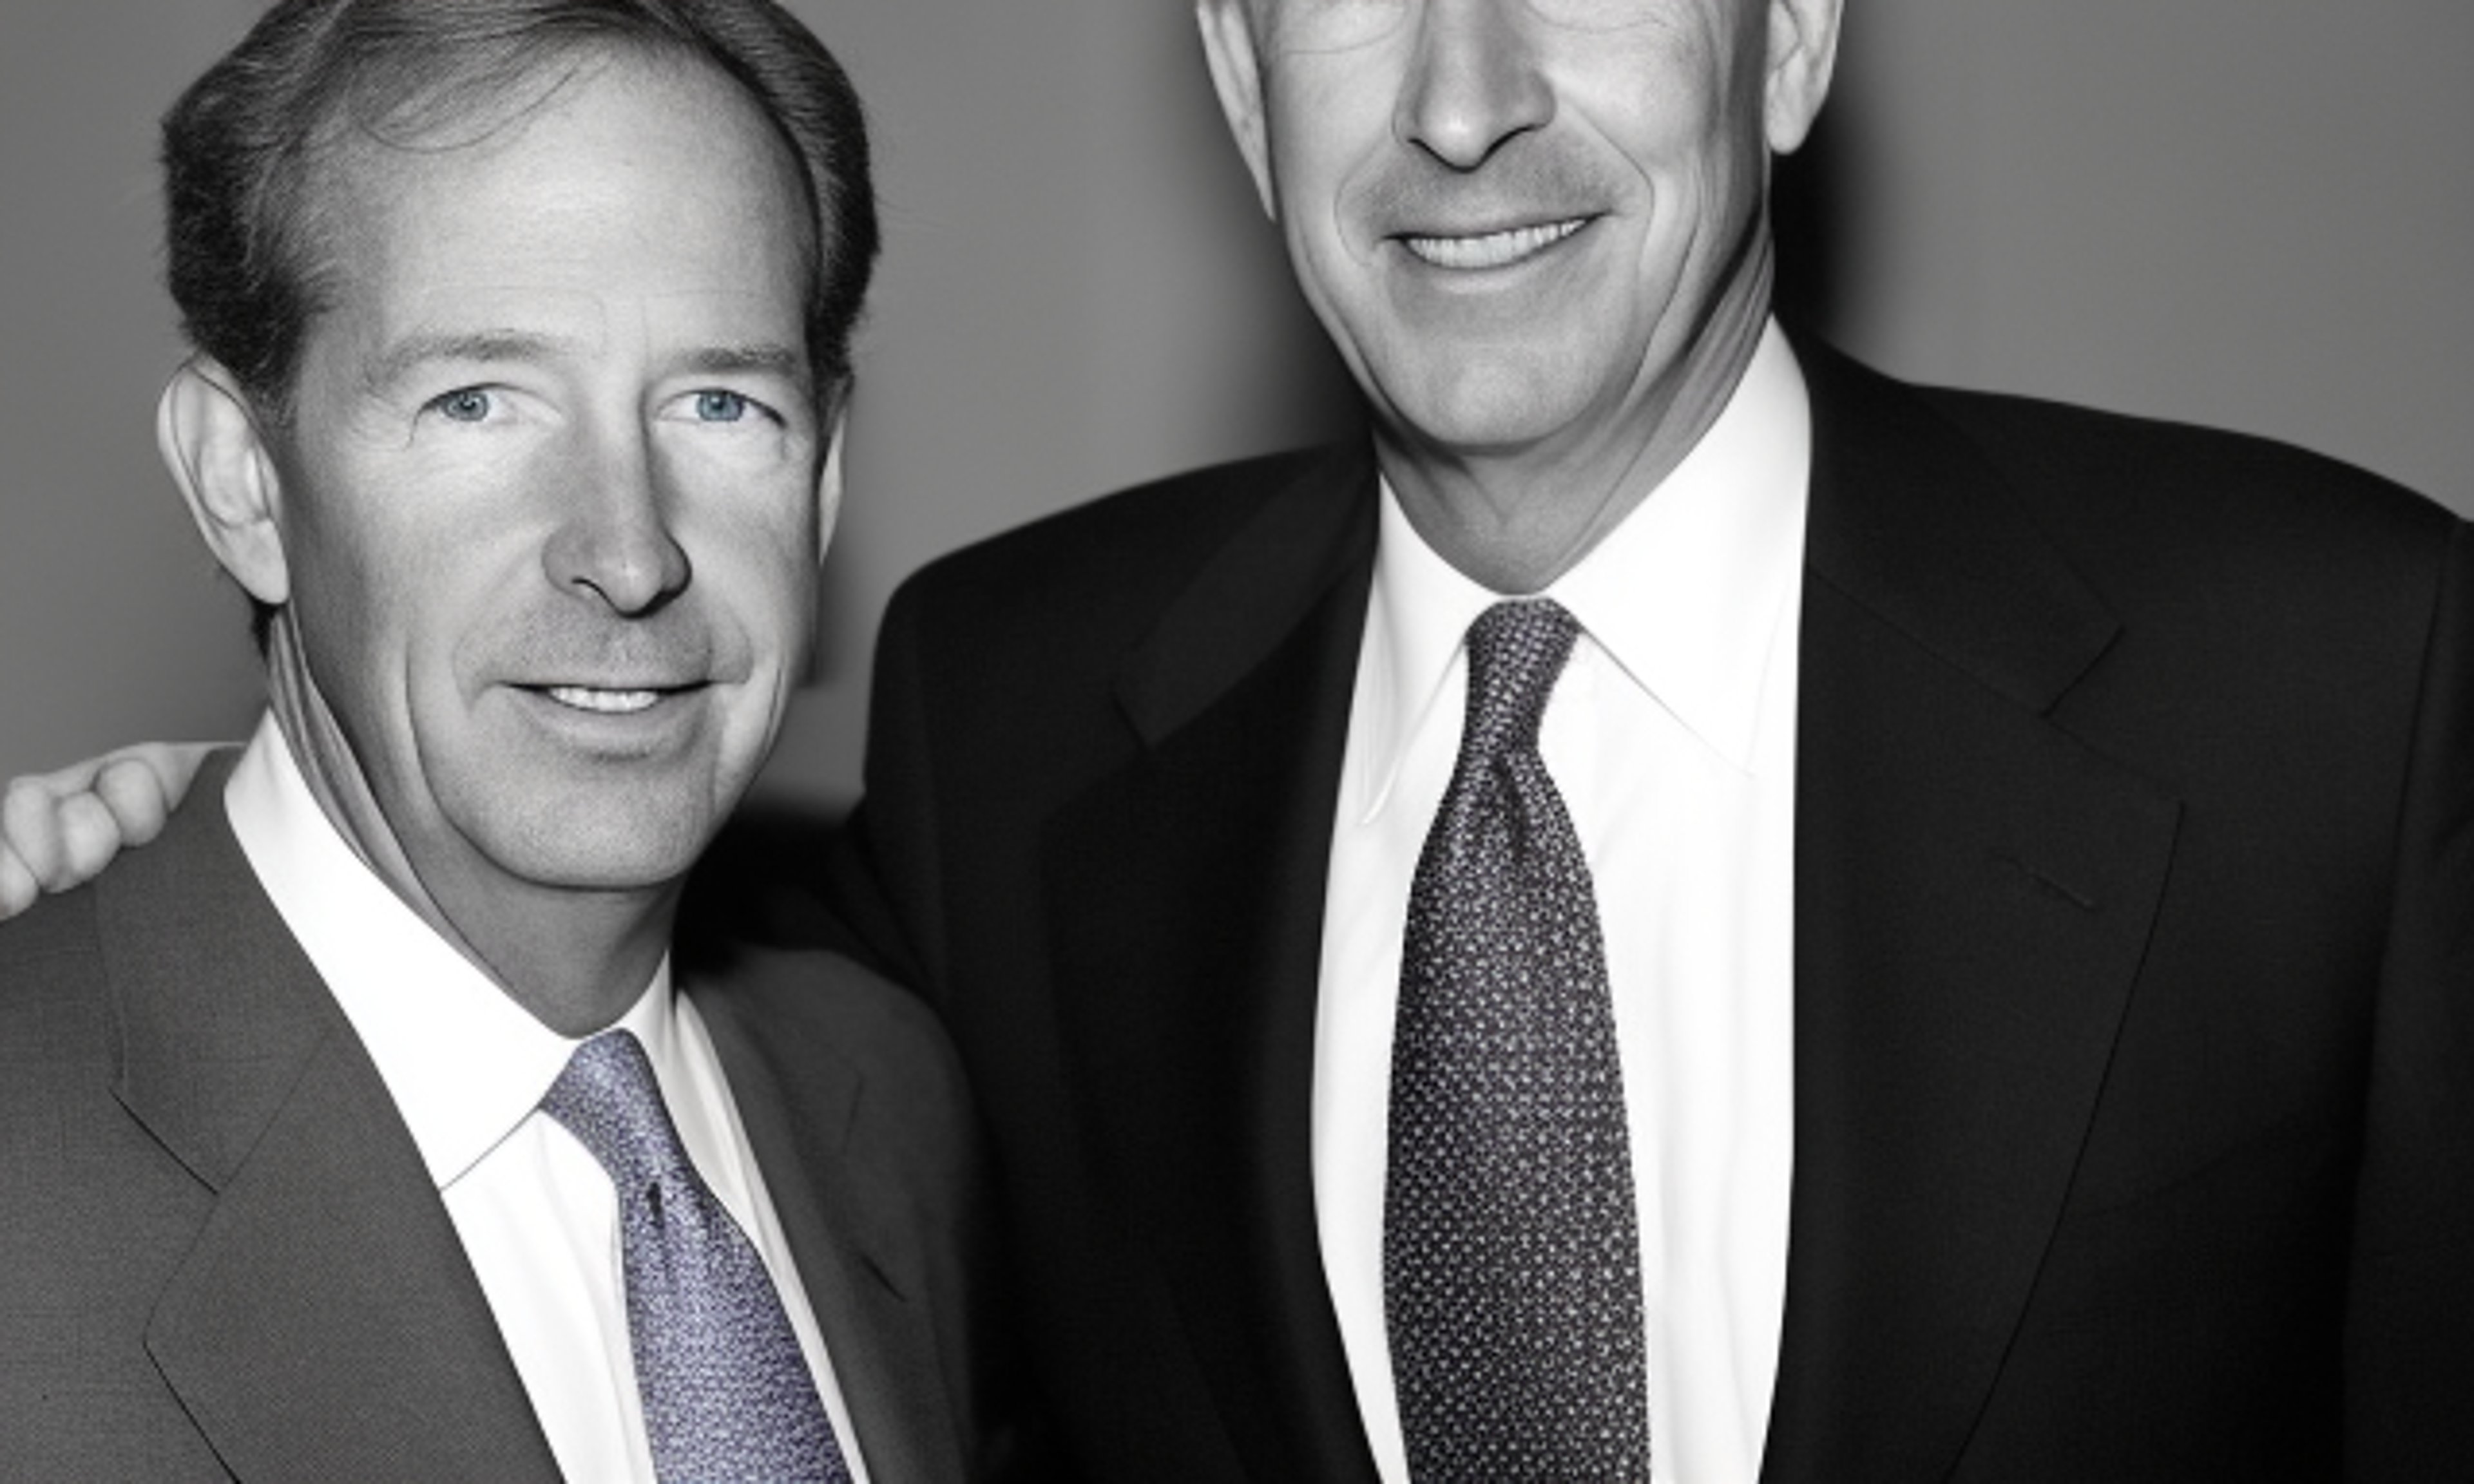 Morgan Stanley CEO James Gorman to Step Down, Succession Race Begins